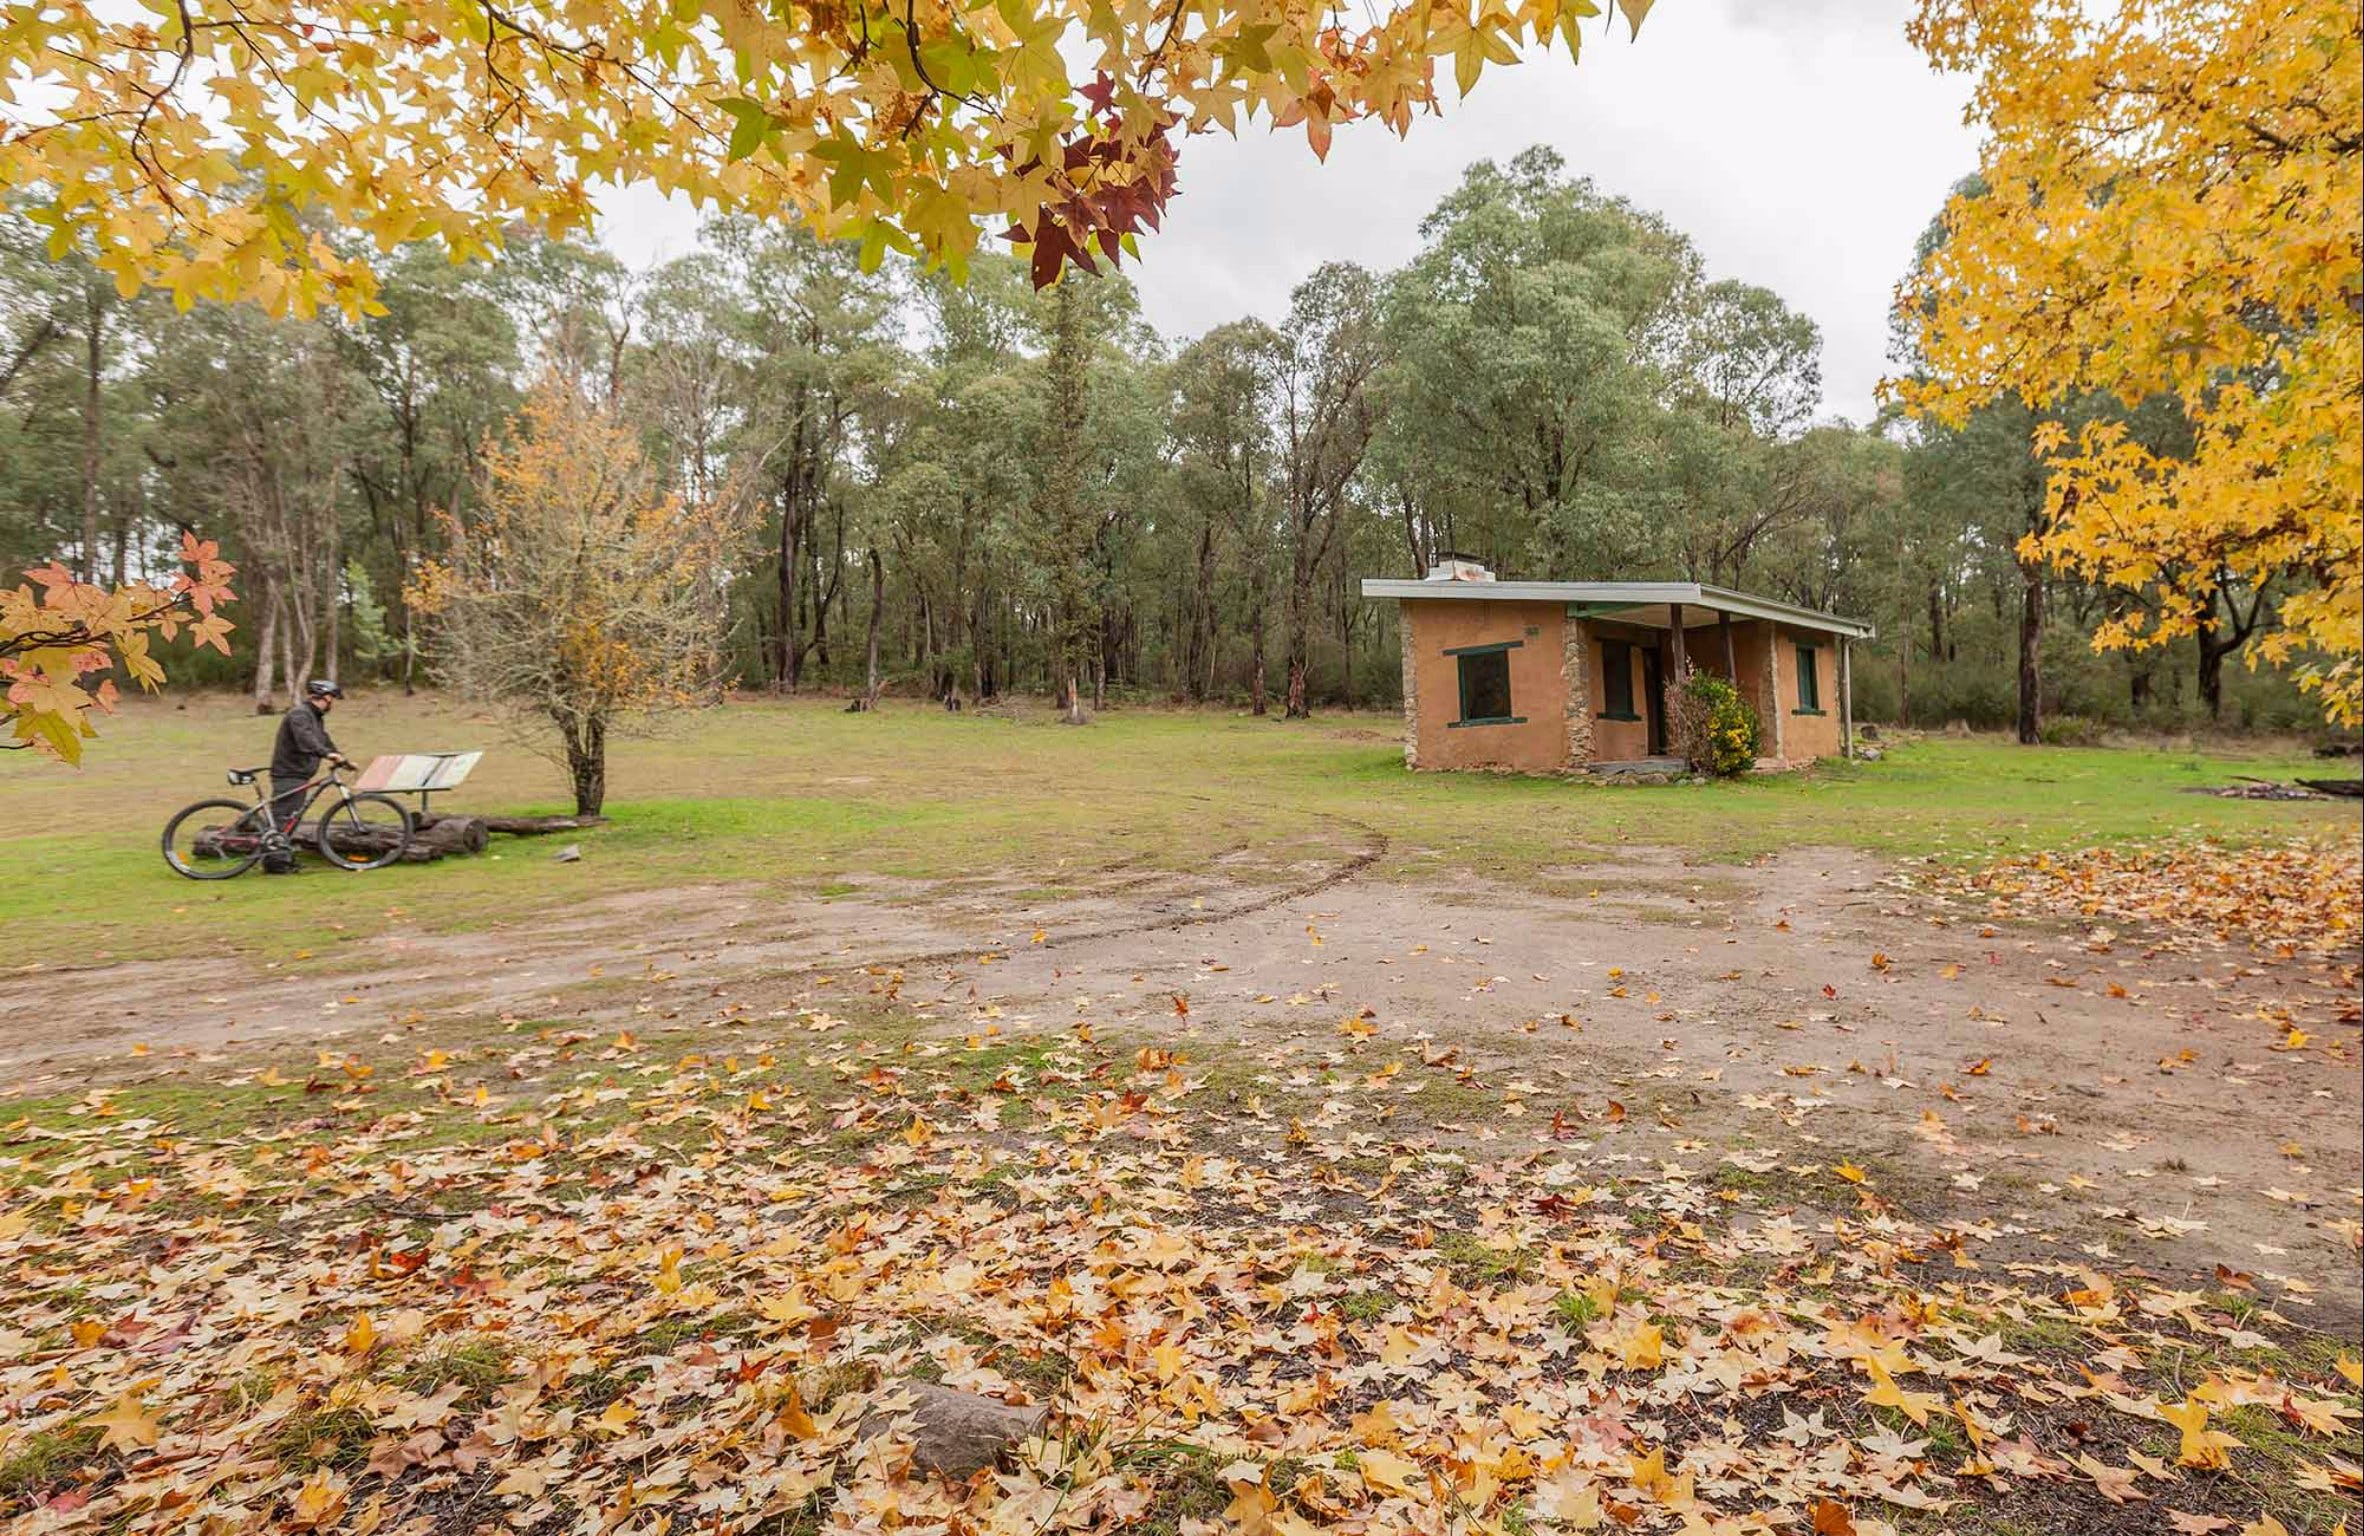 Major Clews Hut Walking Track - Attractions Melbourne